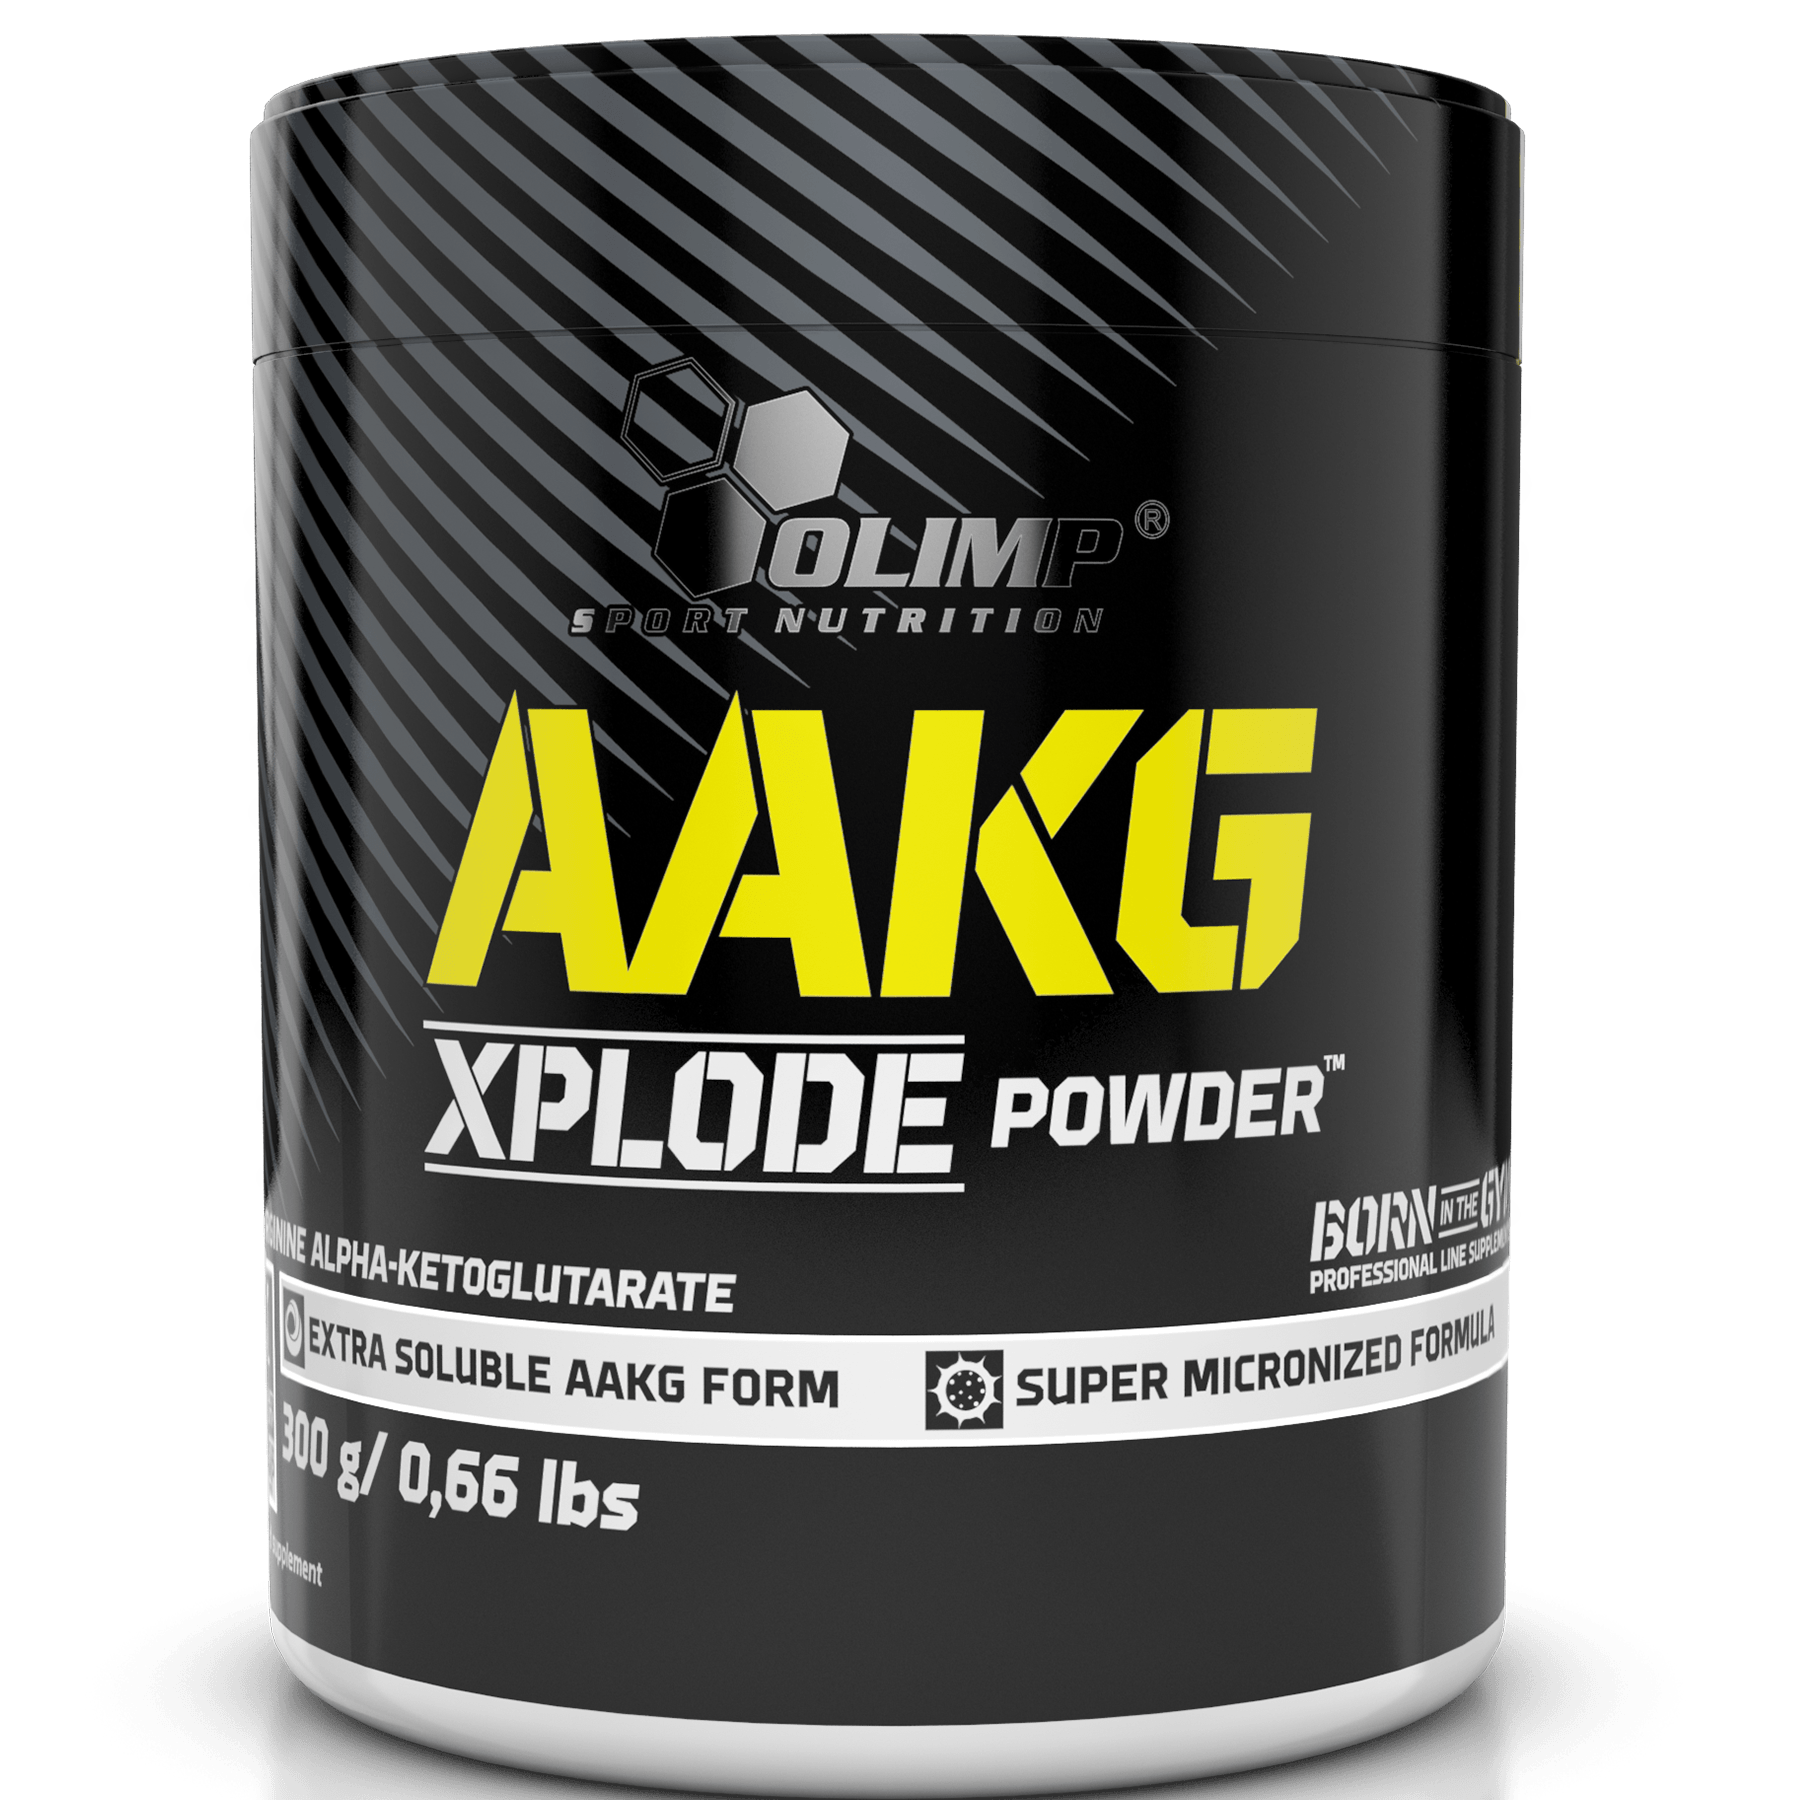 AAKG Xplode Powder, 300 g, Olimp Labs. Arginine. recovery Immunity enhancement Muscle pumping Antioxidant properties Lowering cholesterol Nitric oxide donor 